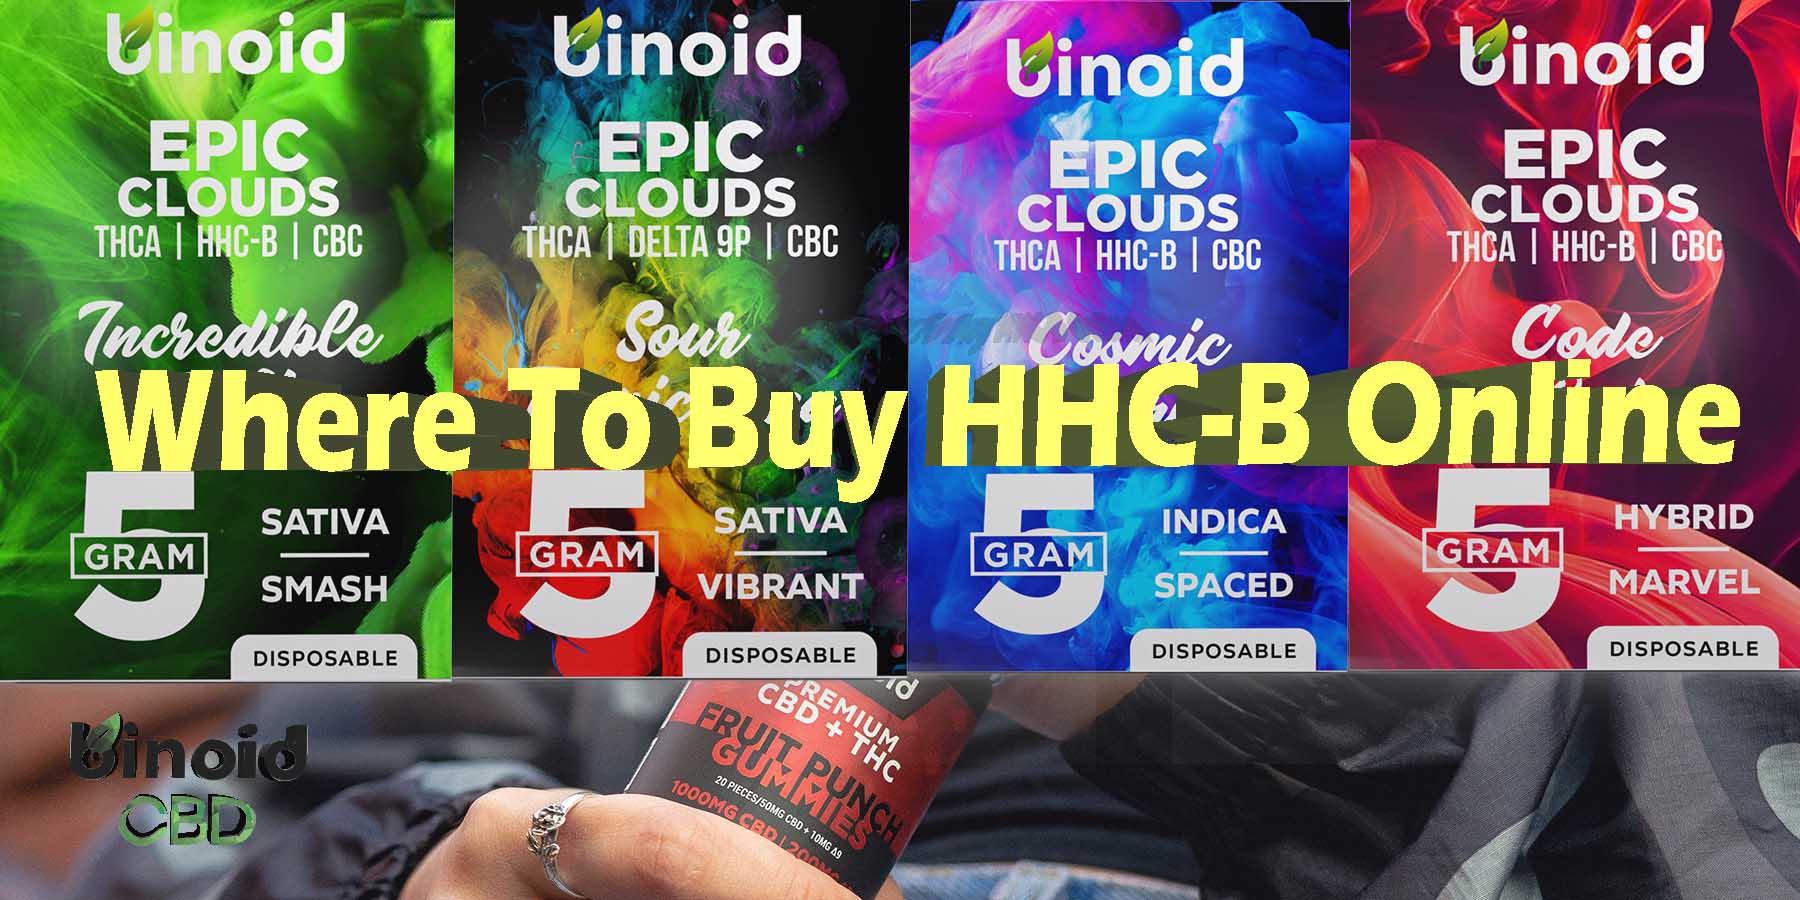 Where To Buy HHC-B Online THCA CBC Disposable Vape Epic Clouds Review Online Best Brand Price Get Near Me Lowest Coupon Discount Store Shop Vapes Carts Online Best Brand Online